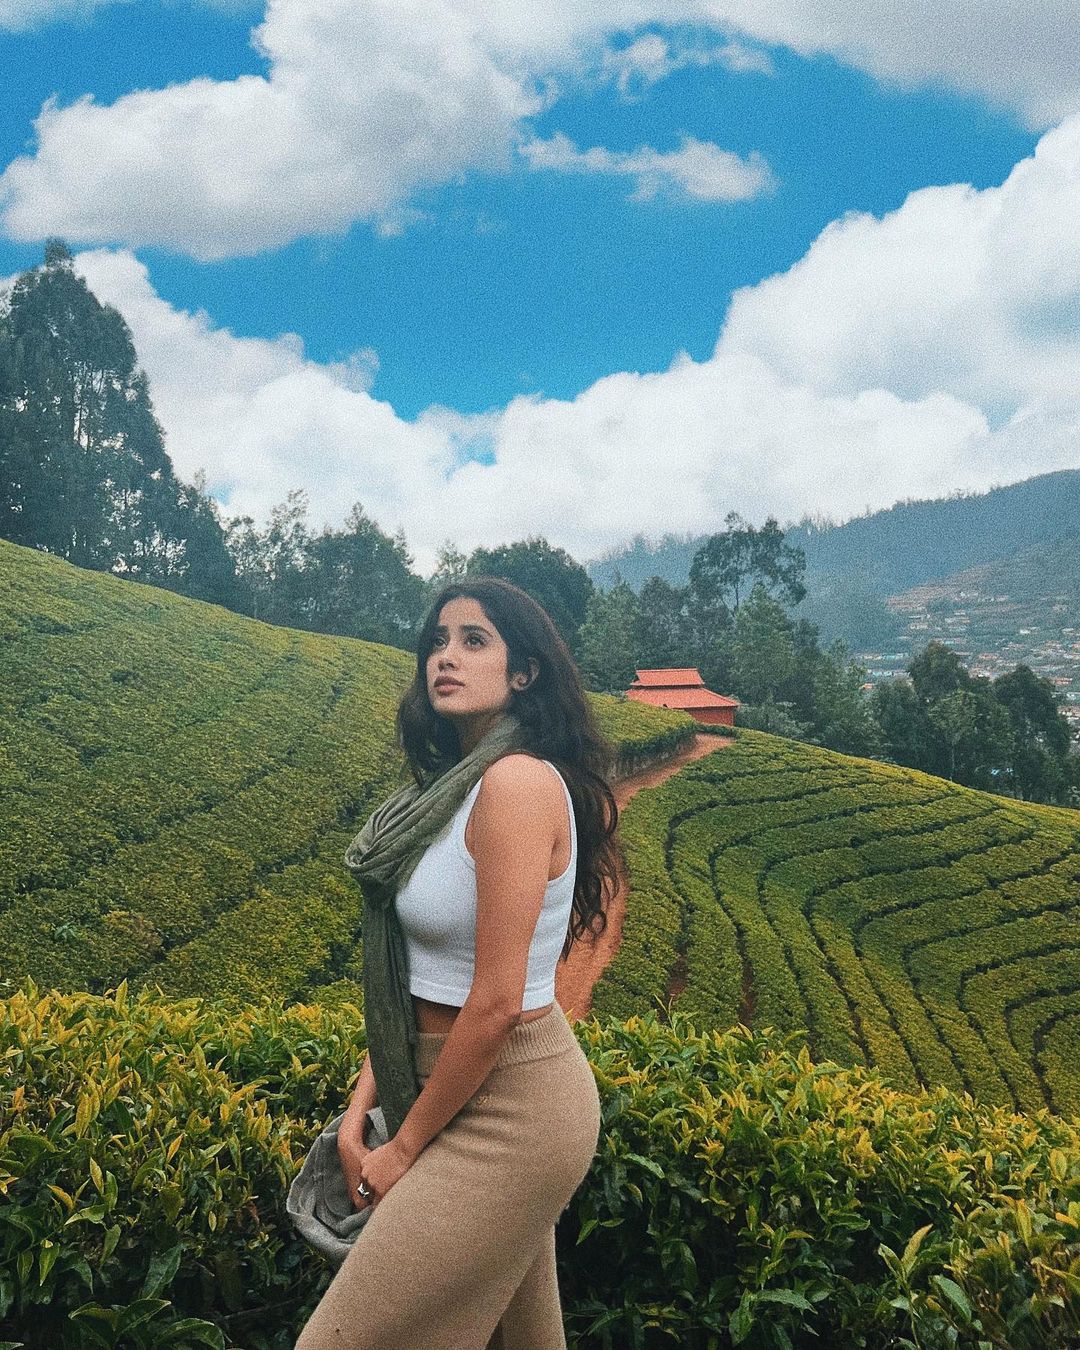 Janhvi Kapoor Looks Drop-dead Gorgeous As She Poses In Tea Garden During Ooty Trip